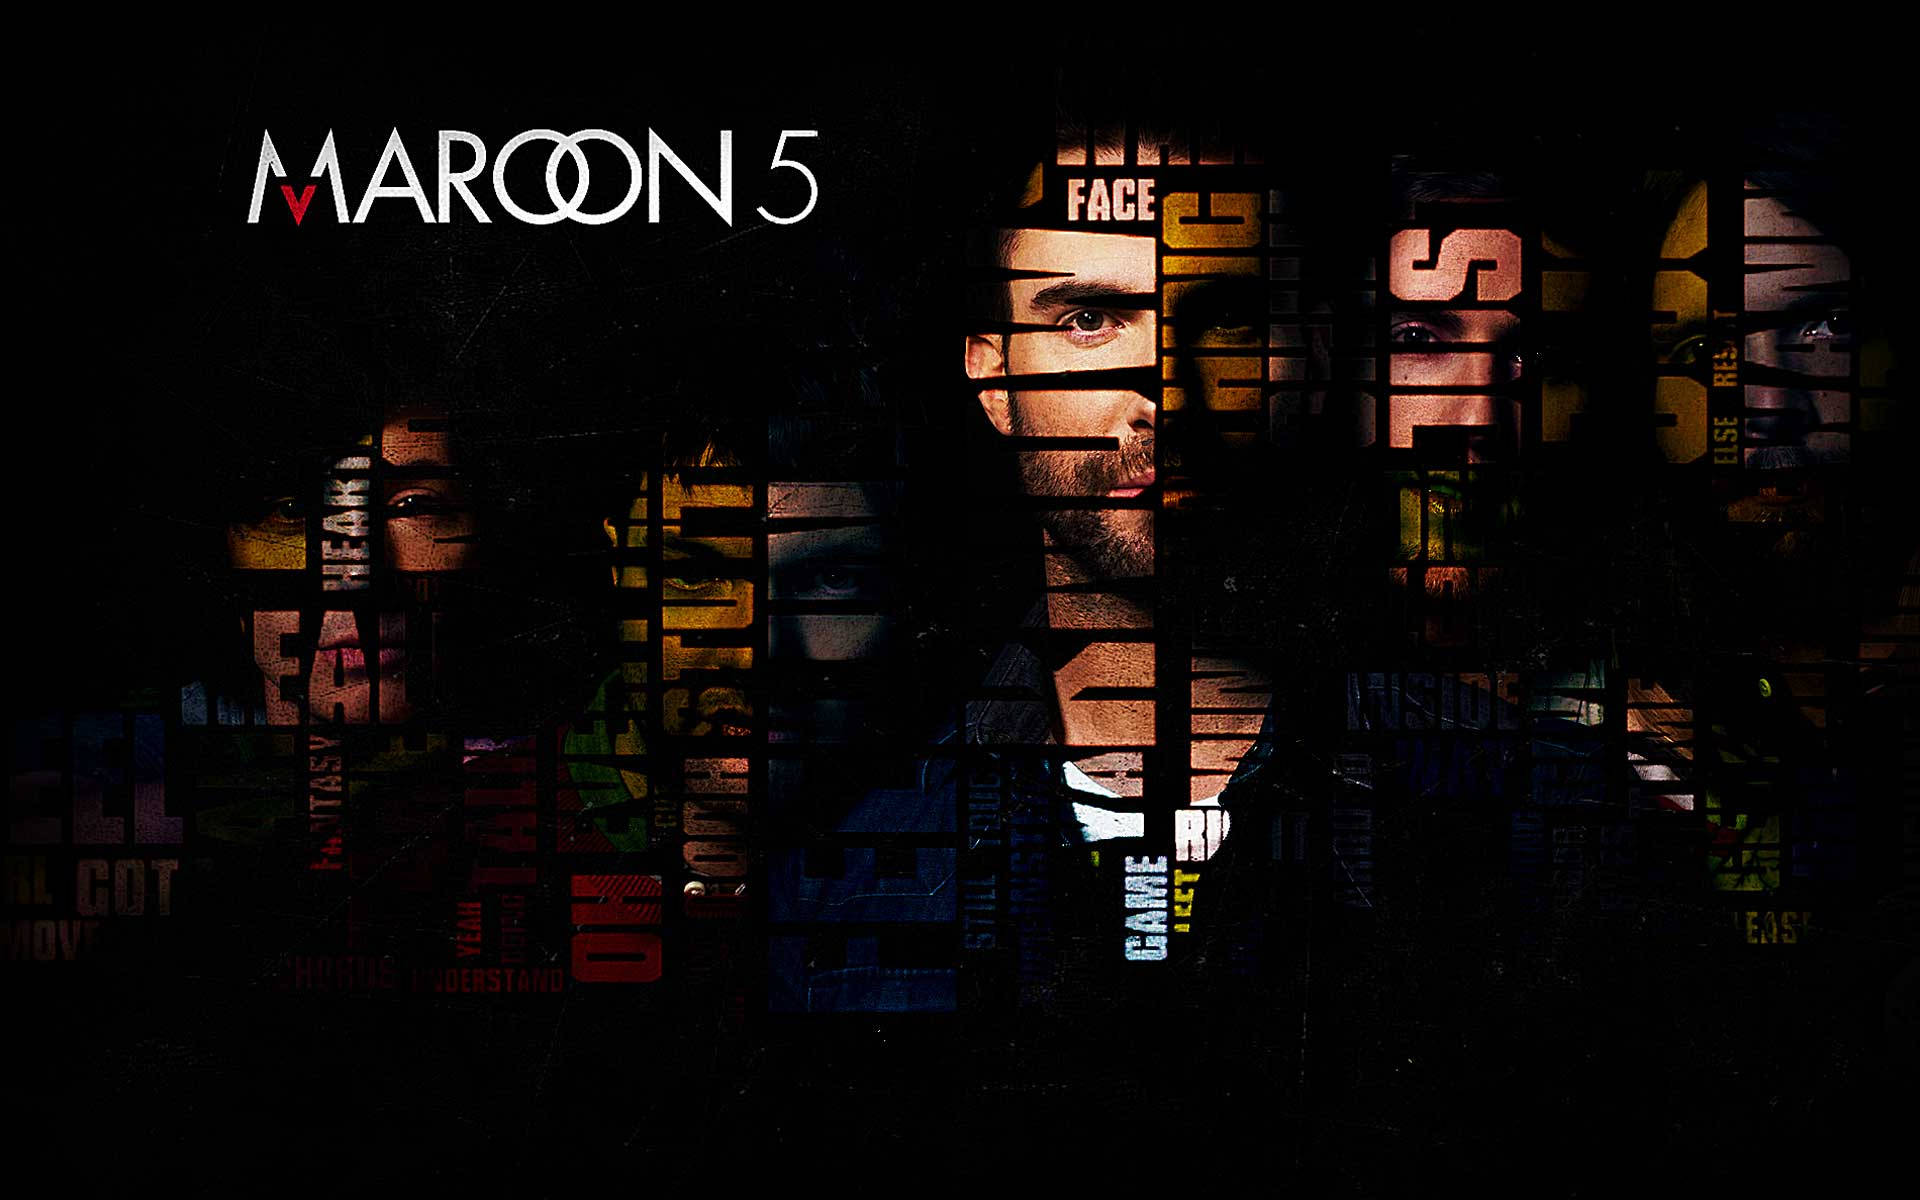 Maroon 5 Words On Faces